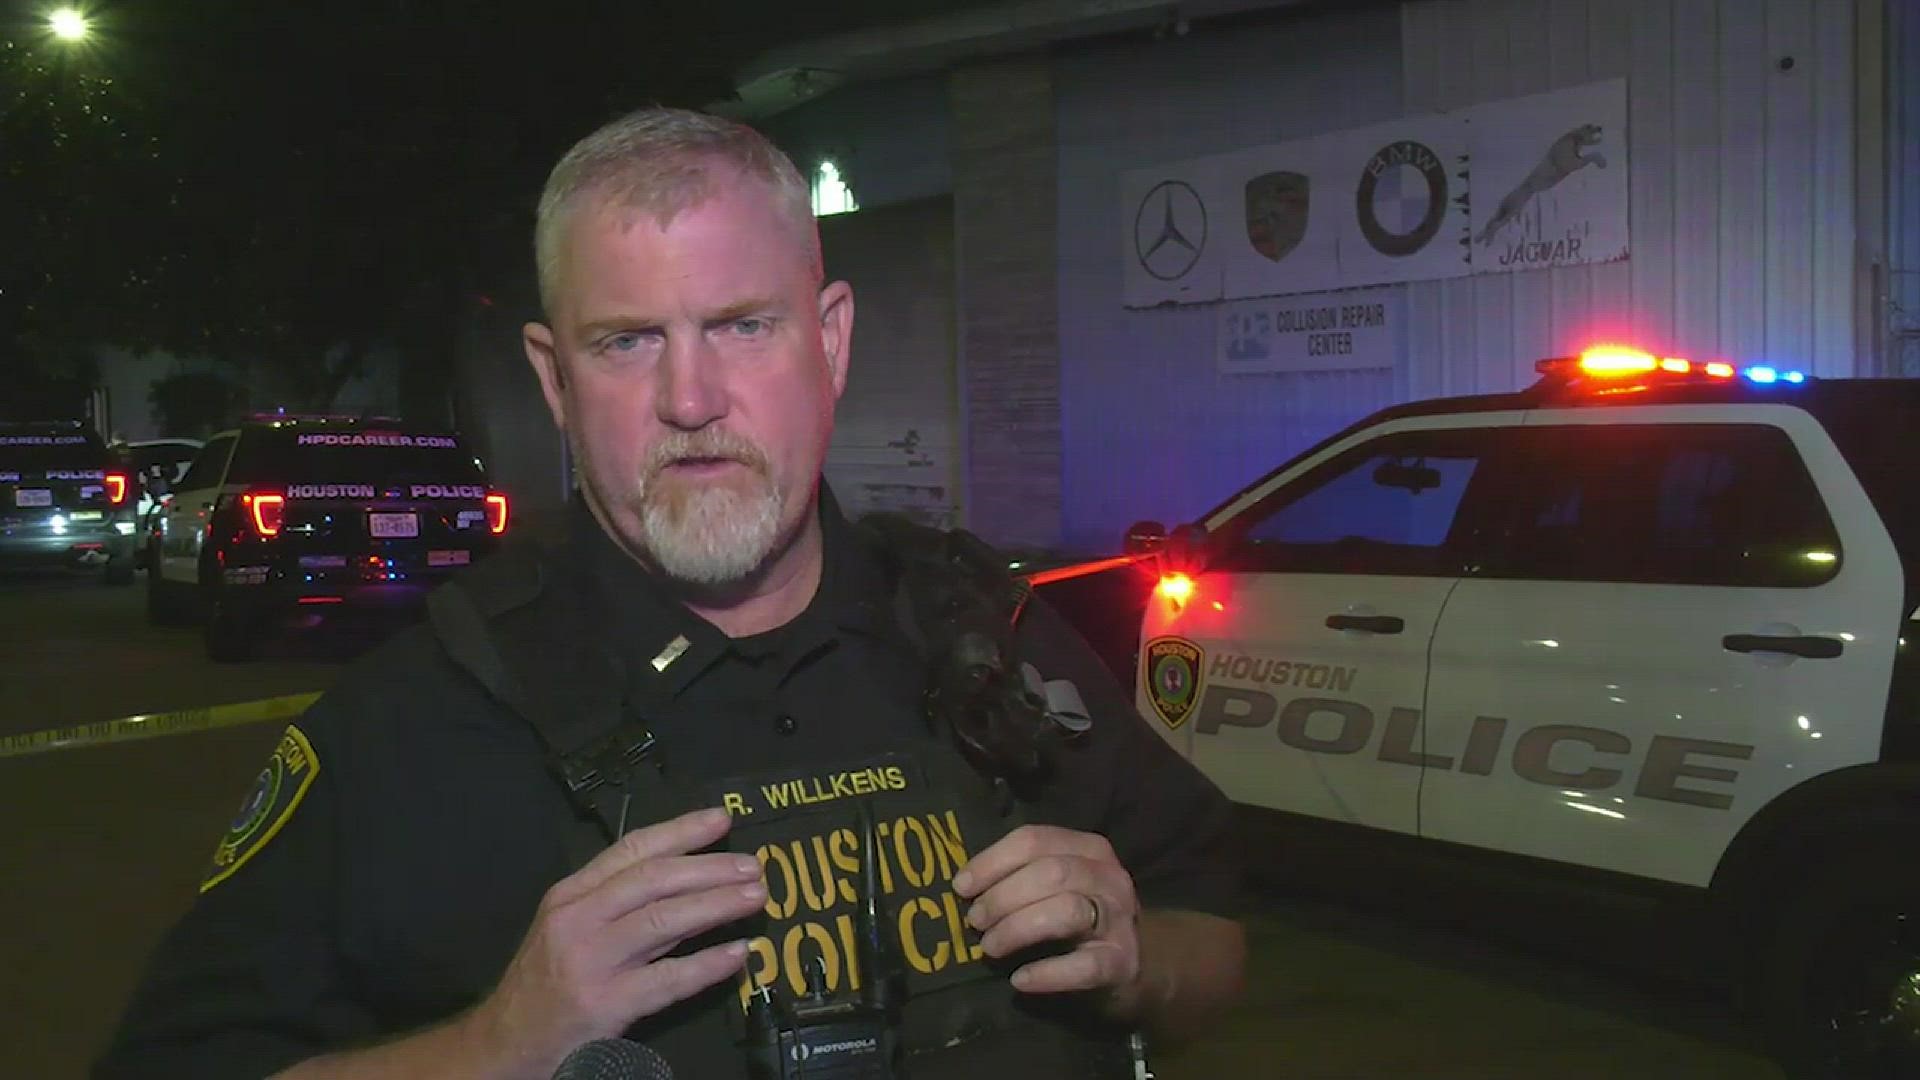 Houston police are looking for the suspect connected to a shooting the morning of April 22, 2022. Lt. R. Wilkens says they have an idea on who the shooter is.